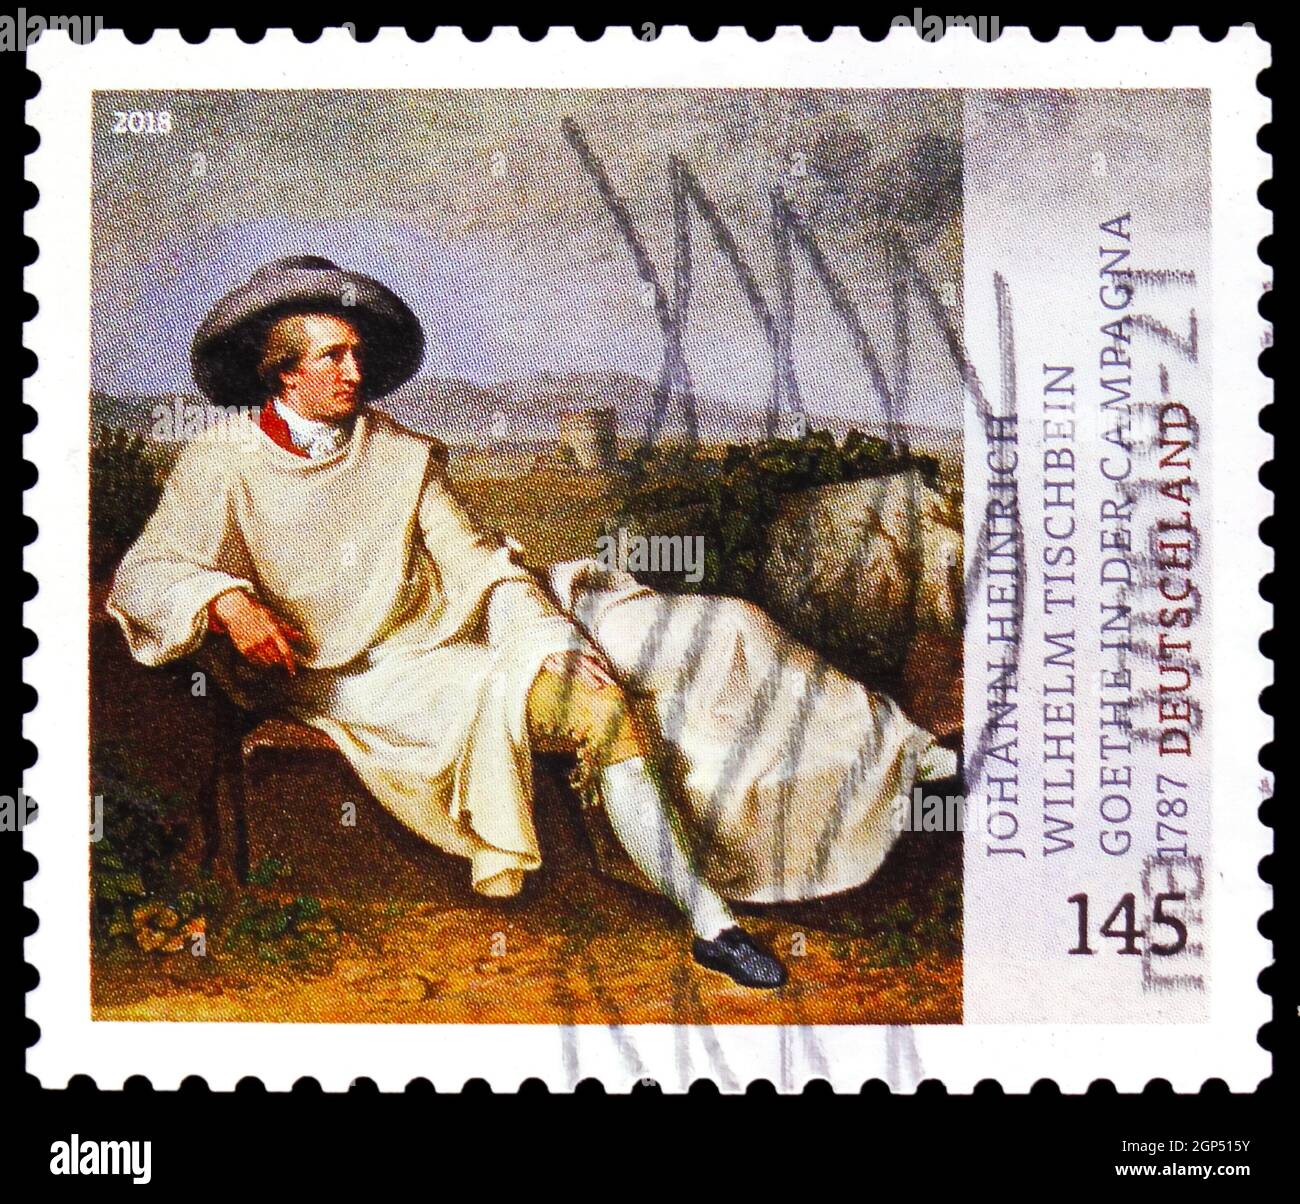 MOSCOW, RUSSIA - AUGUST 4, 2021: Postage stamp printed in Germany shows 'Goethe In Campagna' by Johann Heinrich Wilhelm Tischbein, Treasures of German Stock Photo